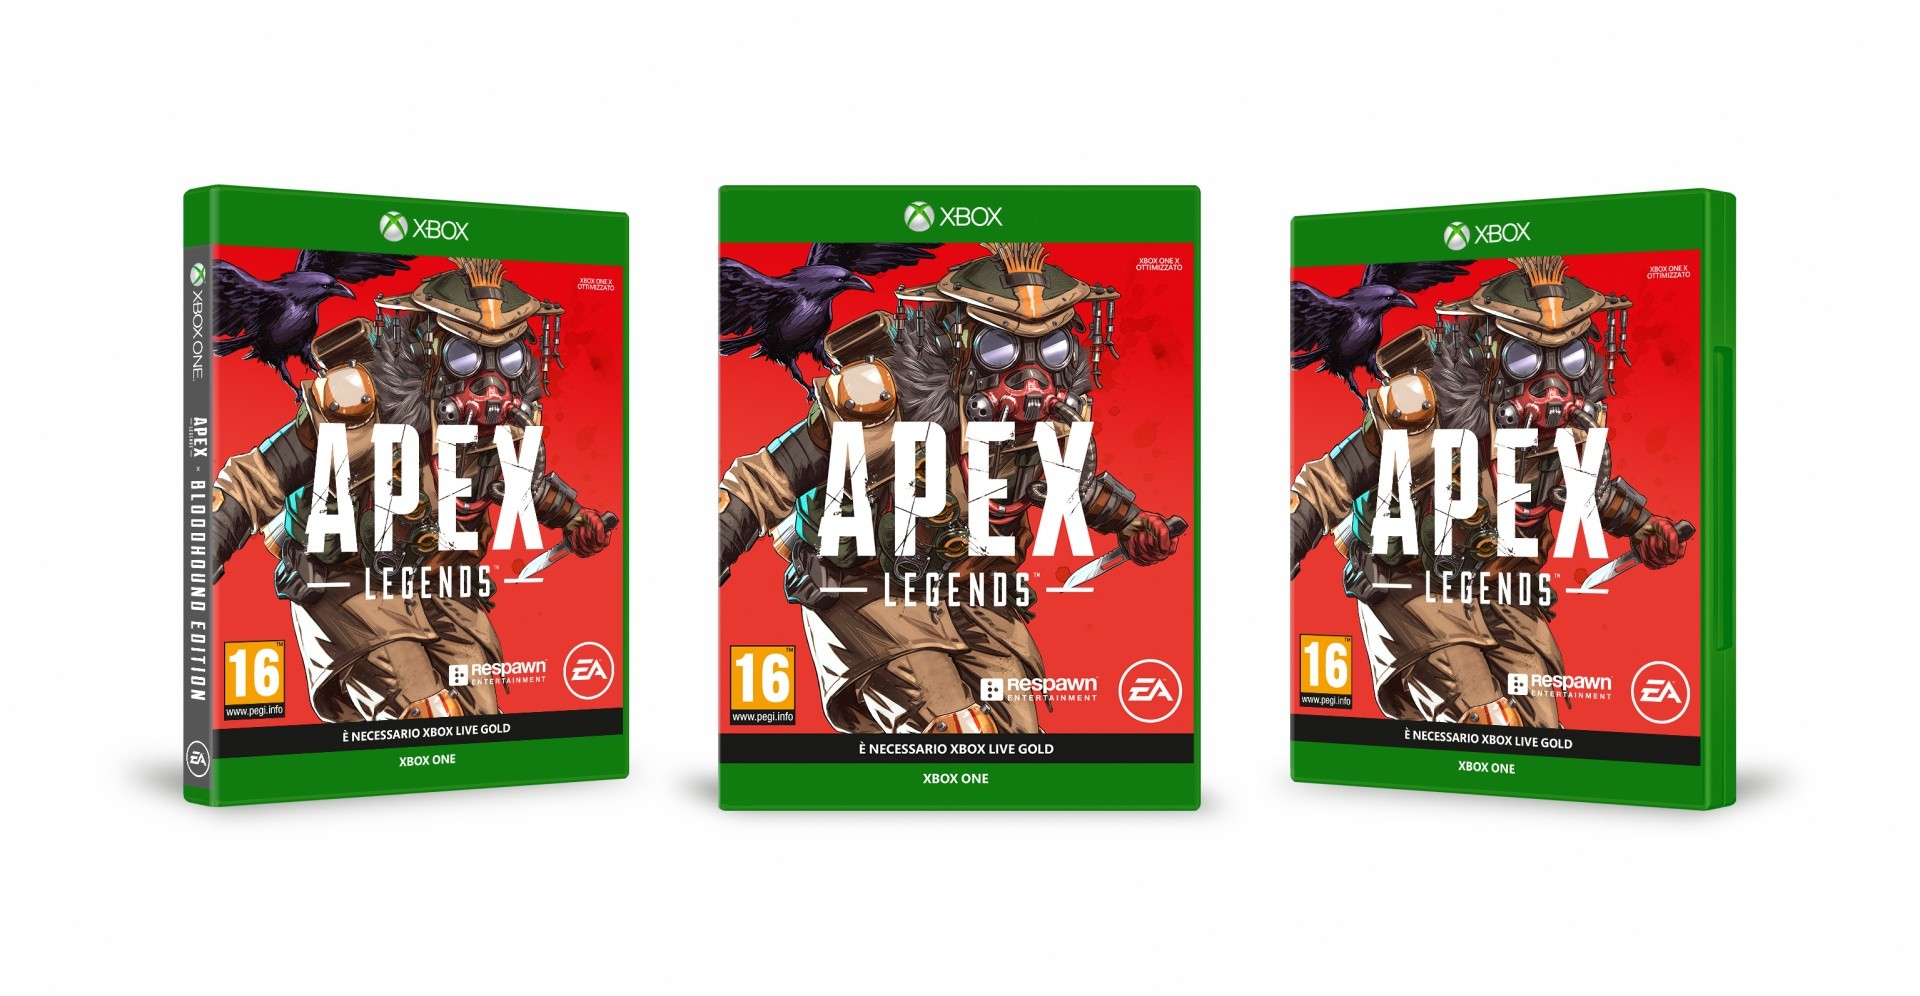 Electronic Arts Apex Legends Bloodhound Edition, Xbox One Speciale Inglese, ITA